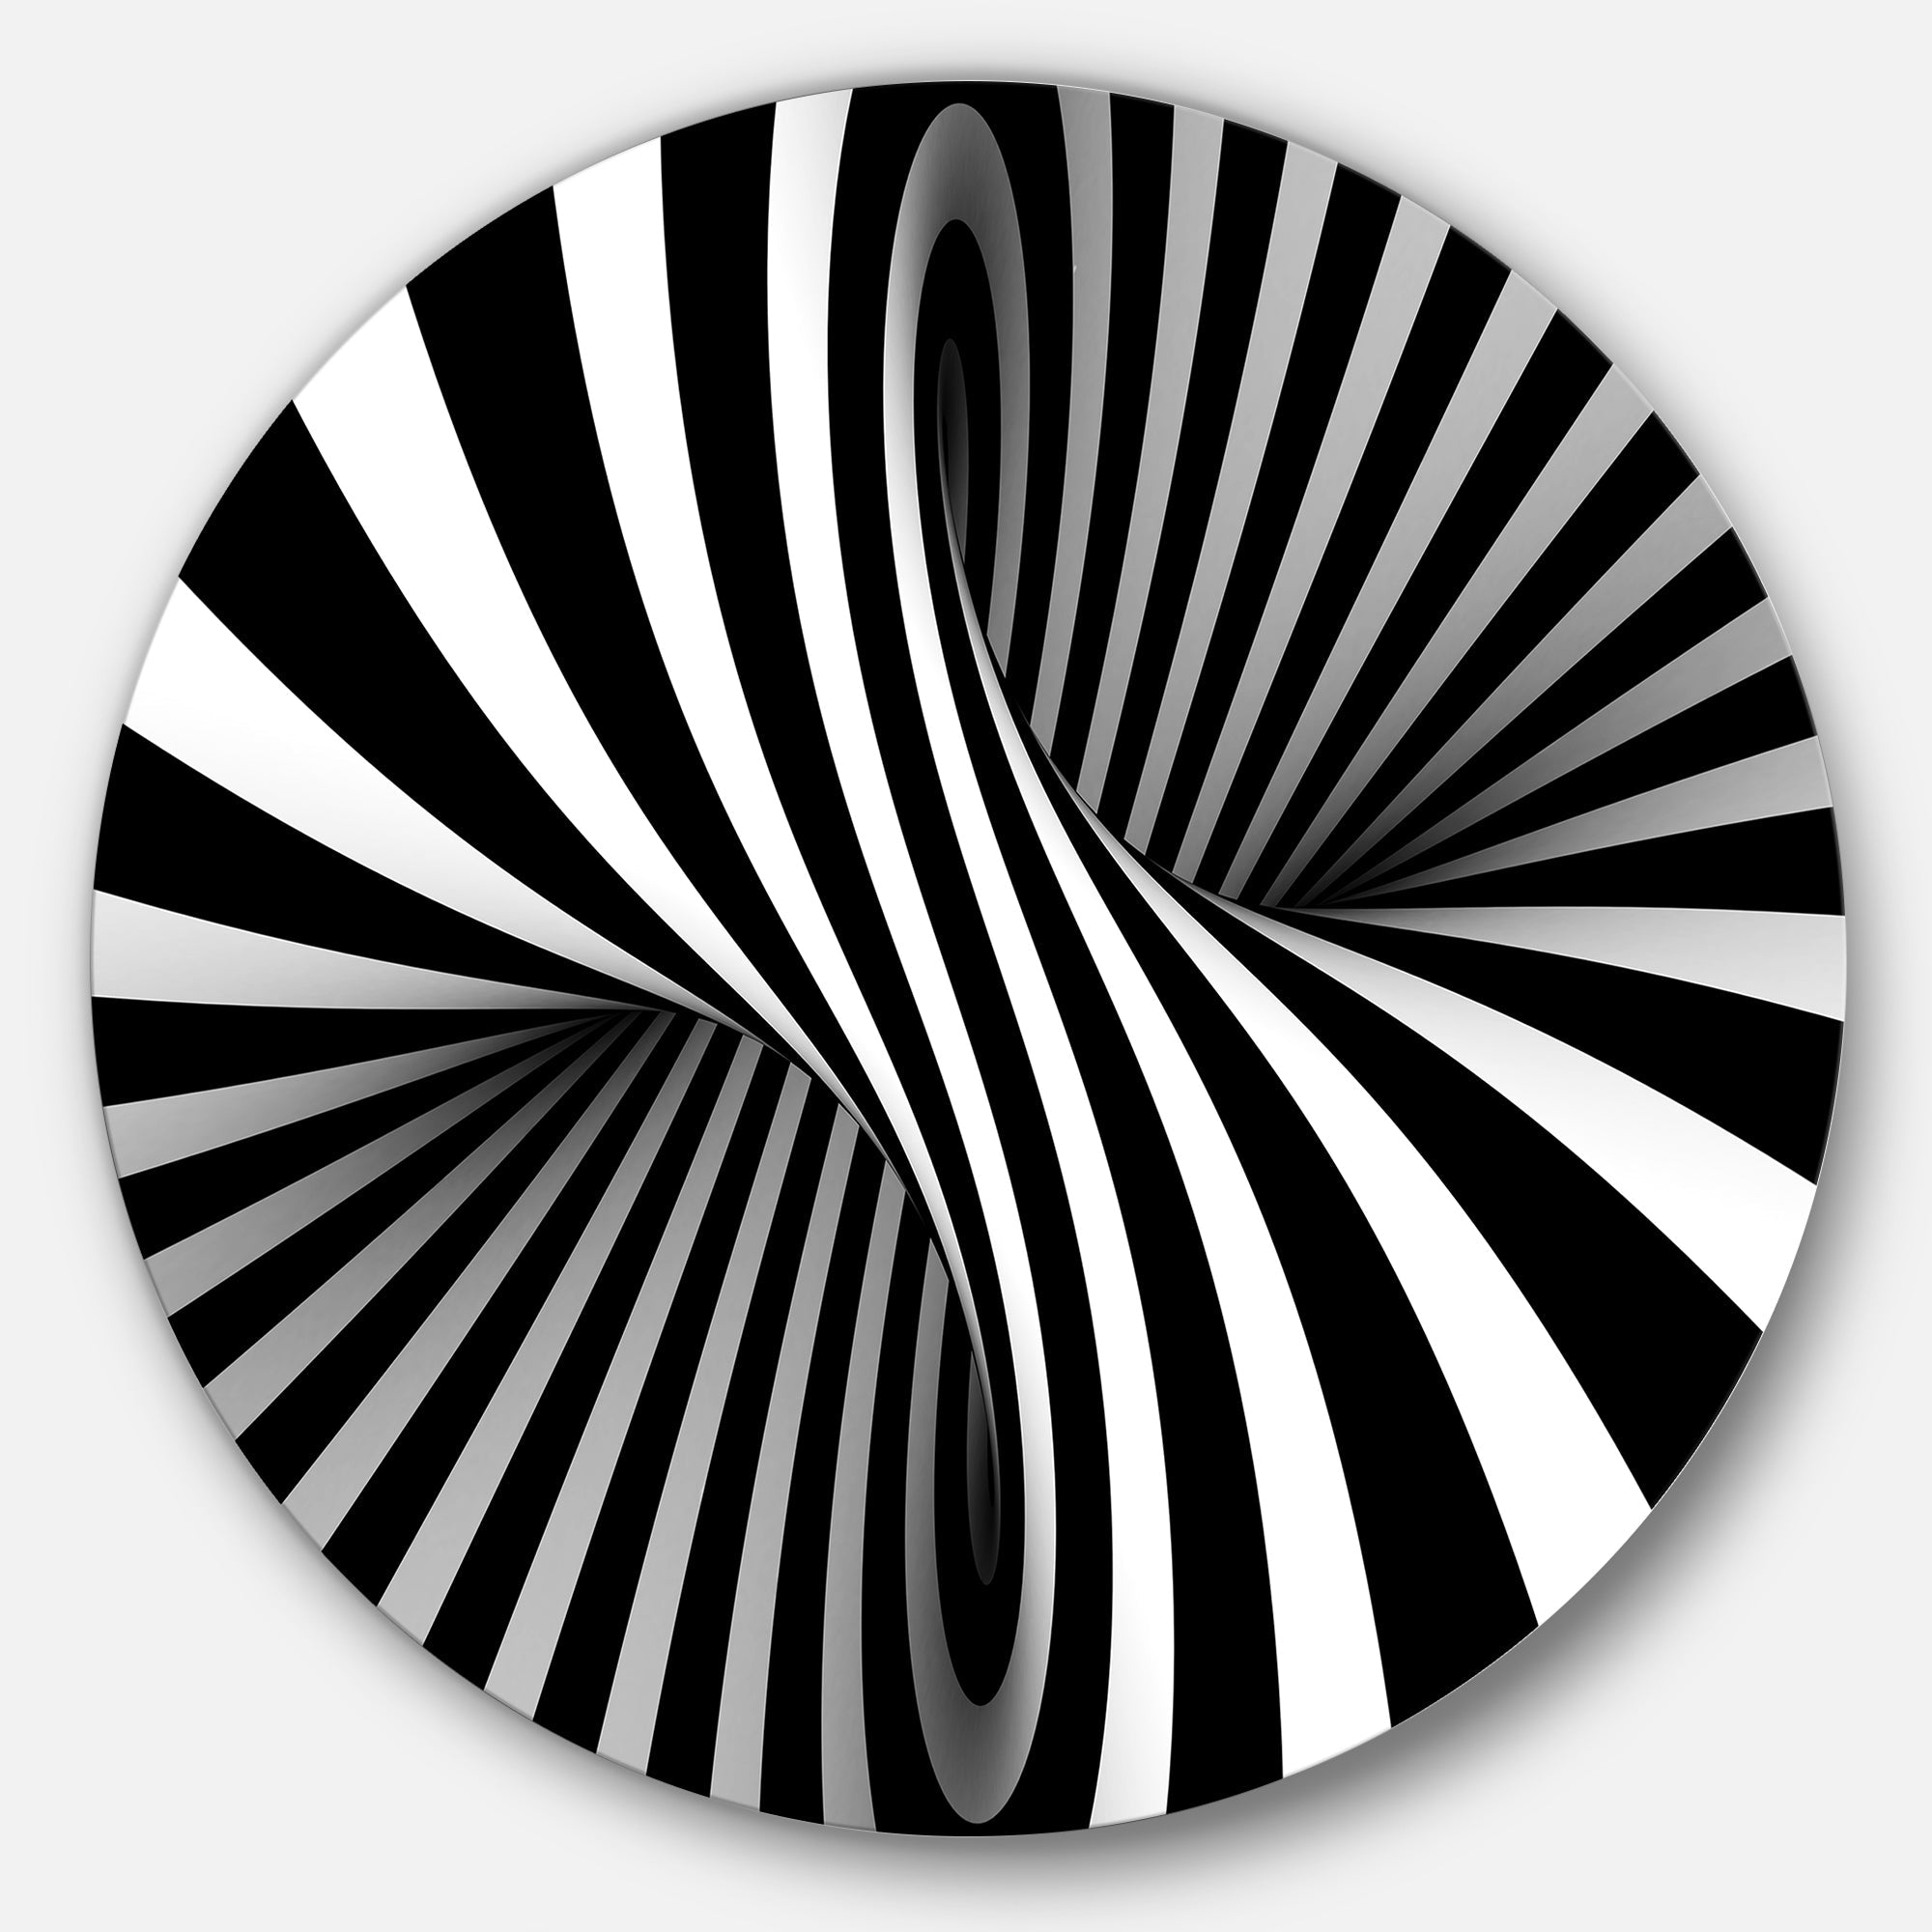 Black and White Spiral Disc Abstract Circle Metal Wall Art